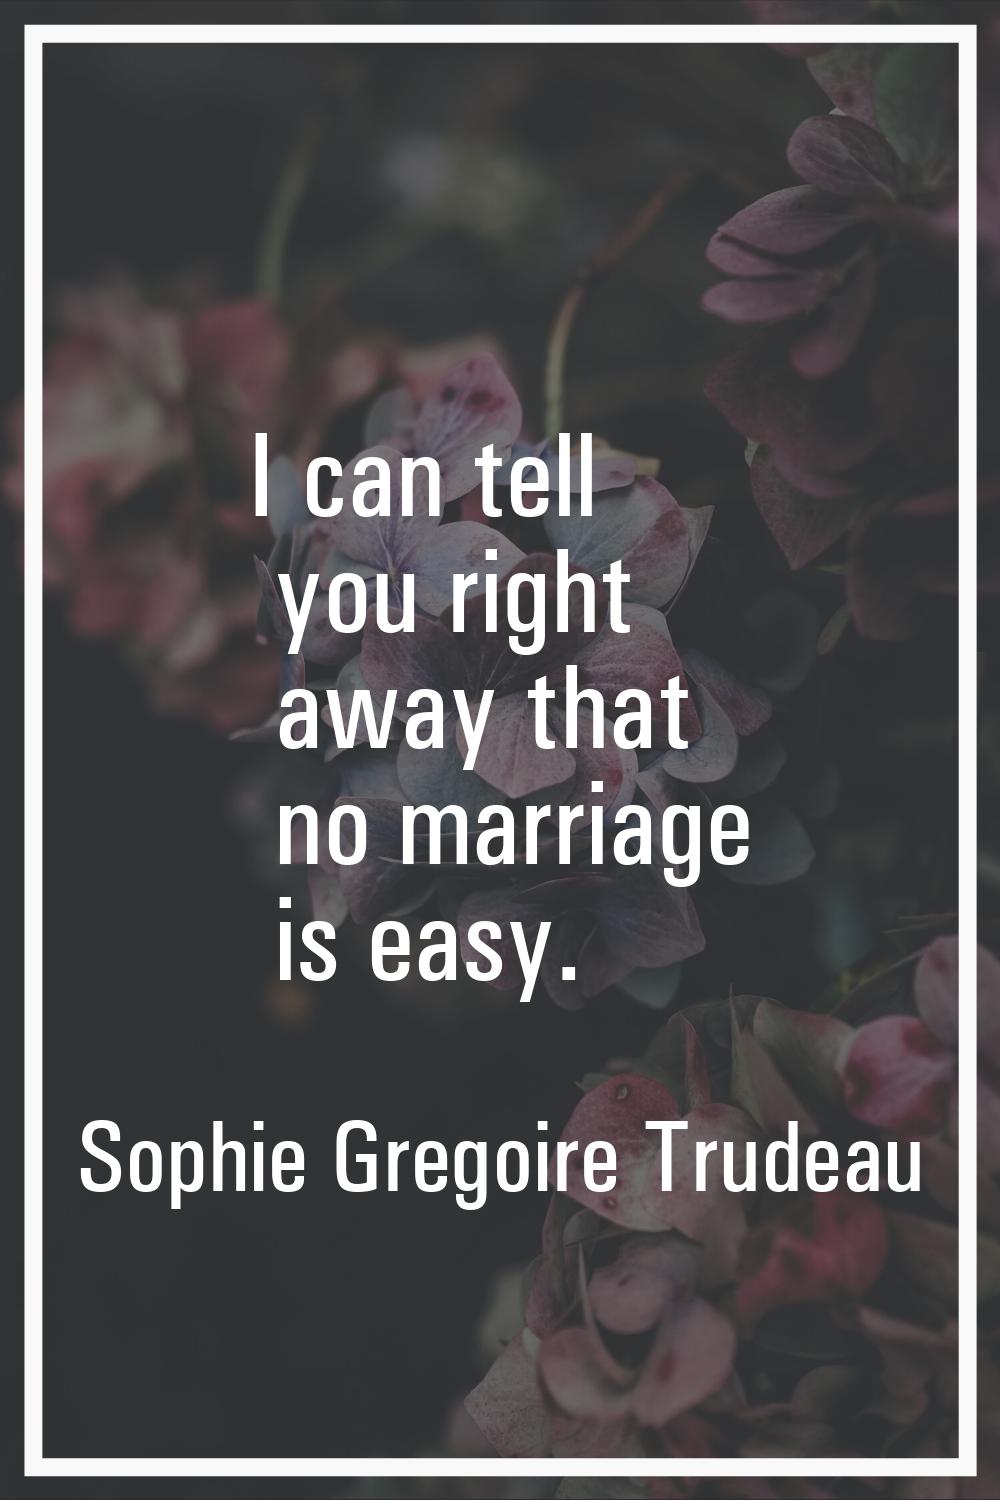 I can tell you right away that no marriage is easy.